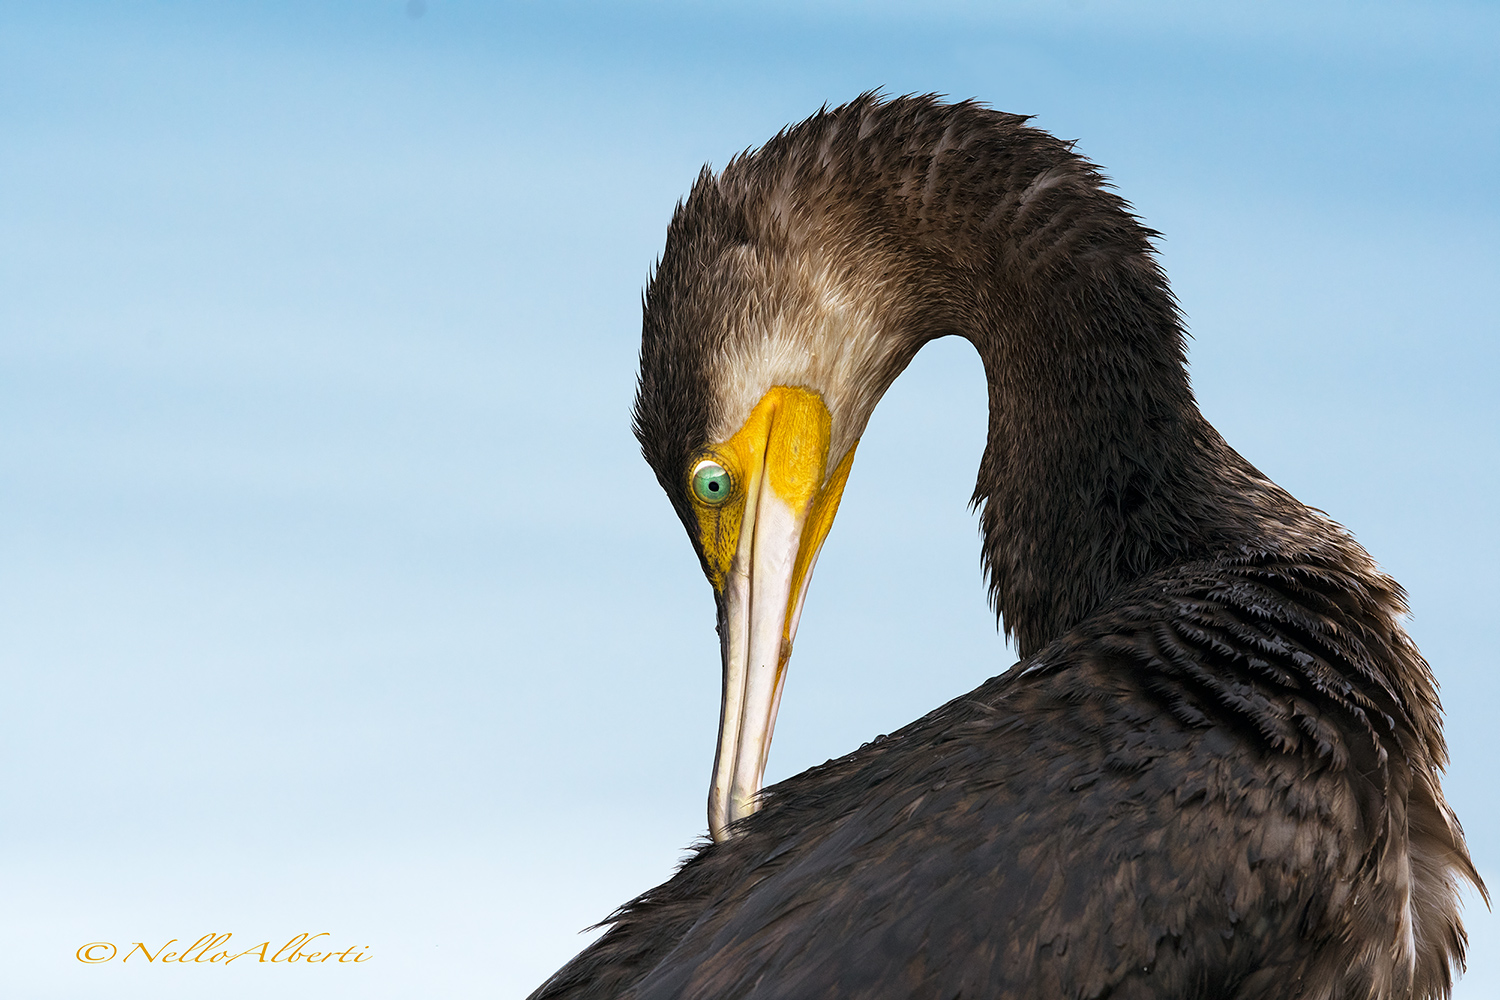 Cormoring, cleanliness of the plumage ...